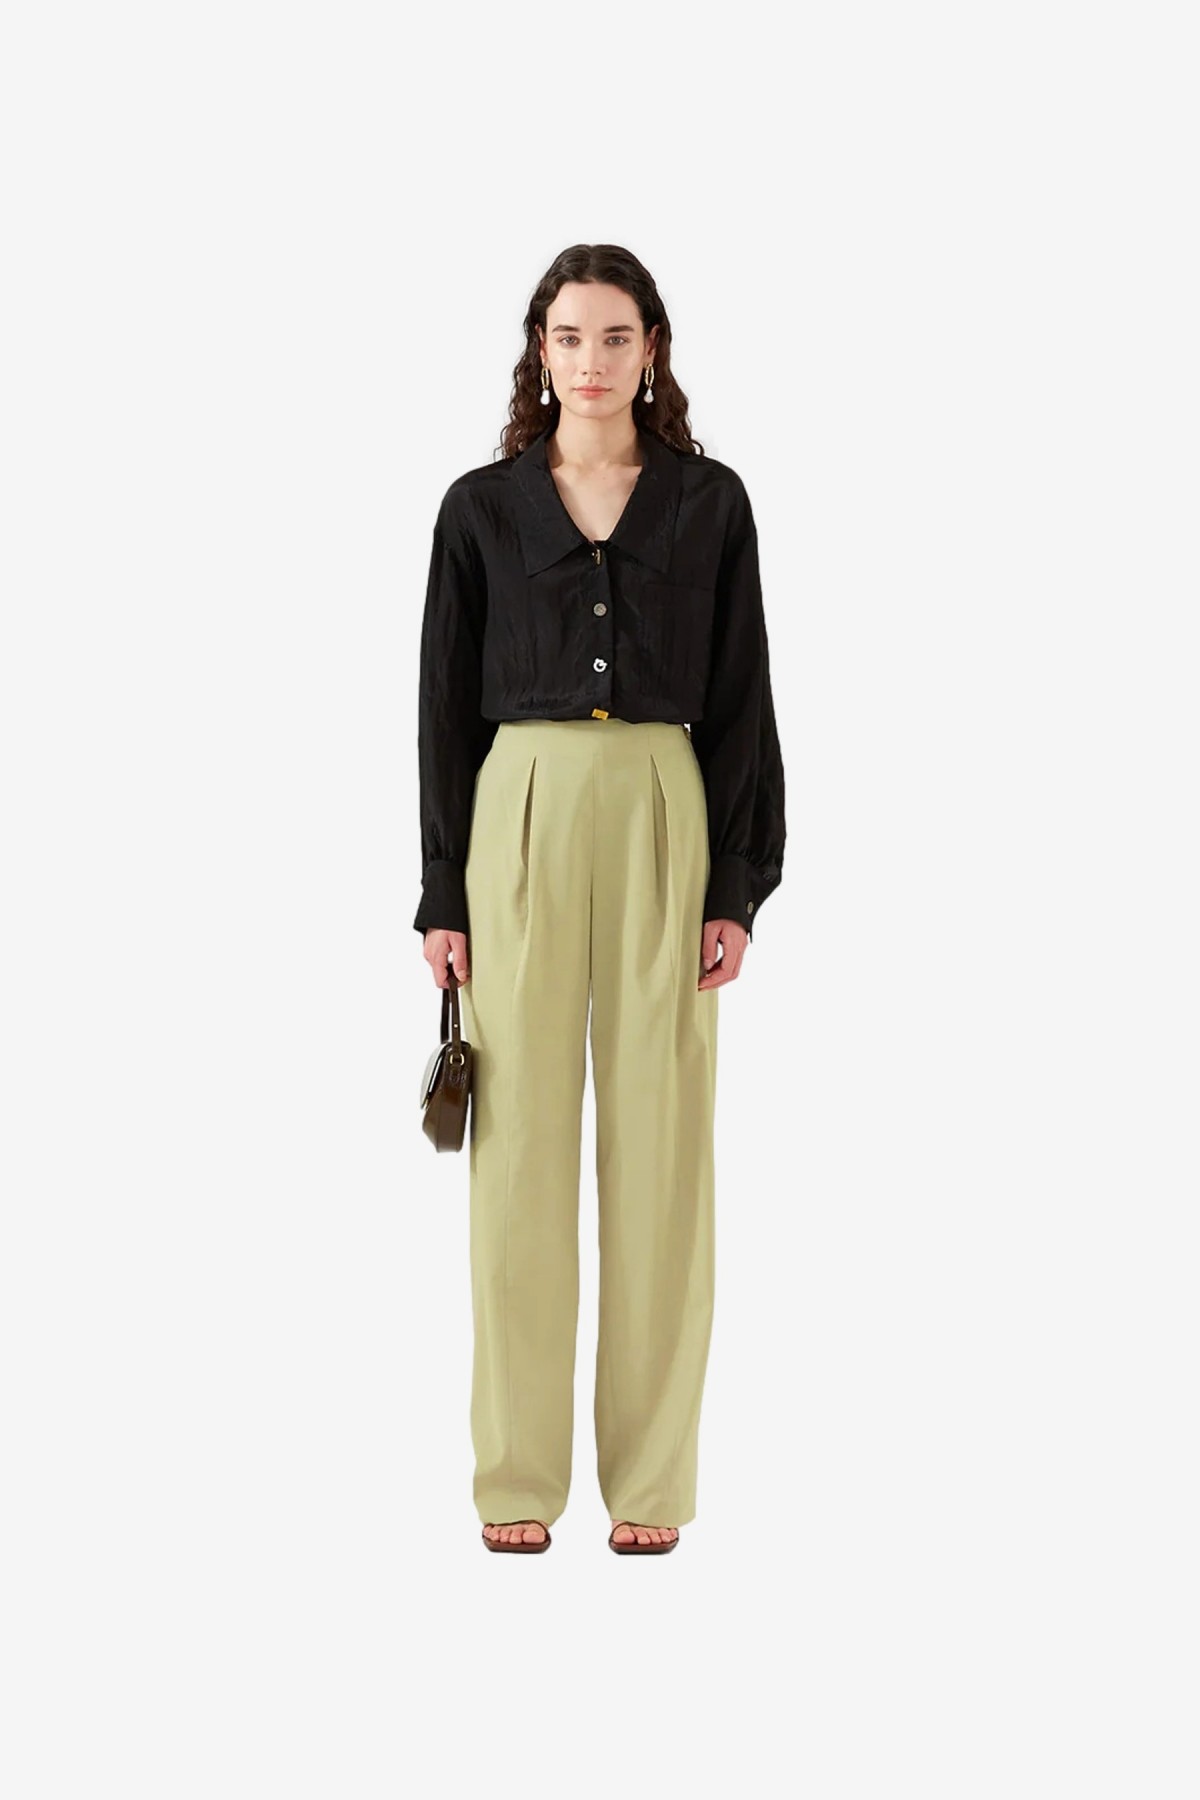 Rejina Pyo Reine Trousers in Tailored Suiting Sage